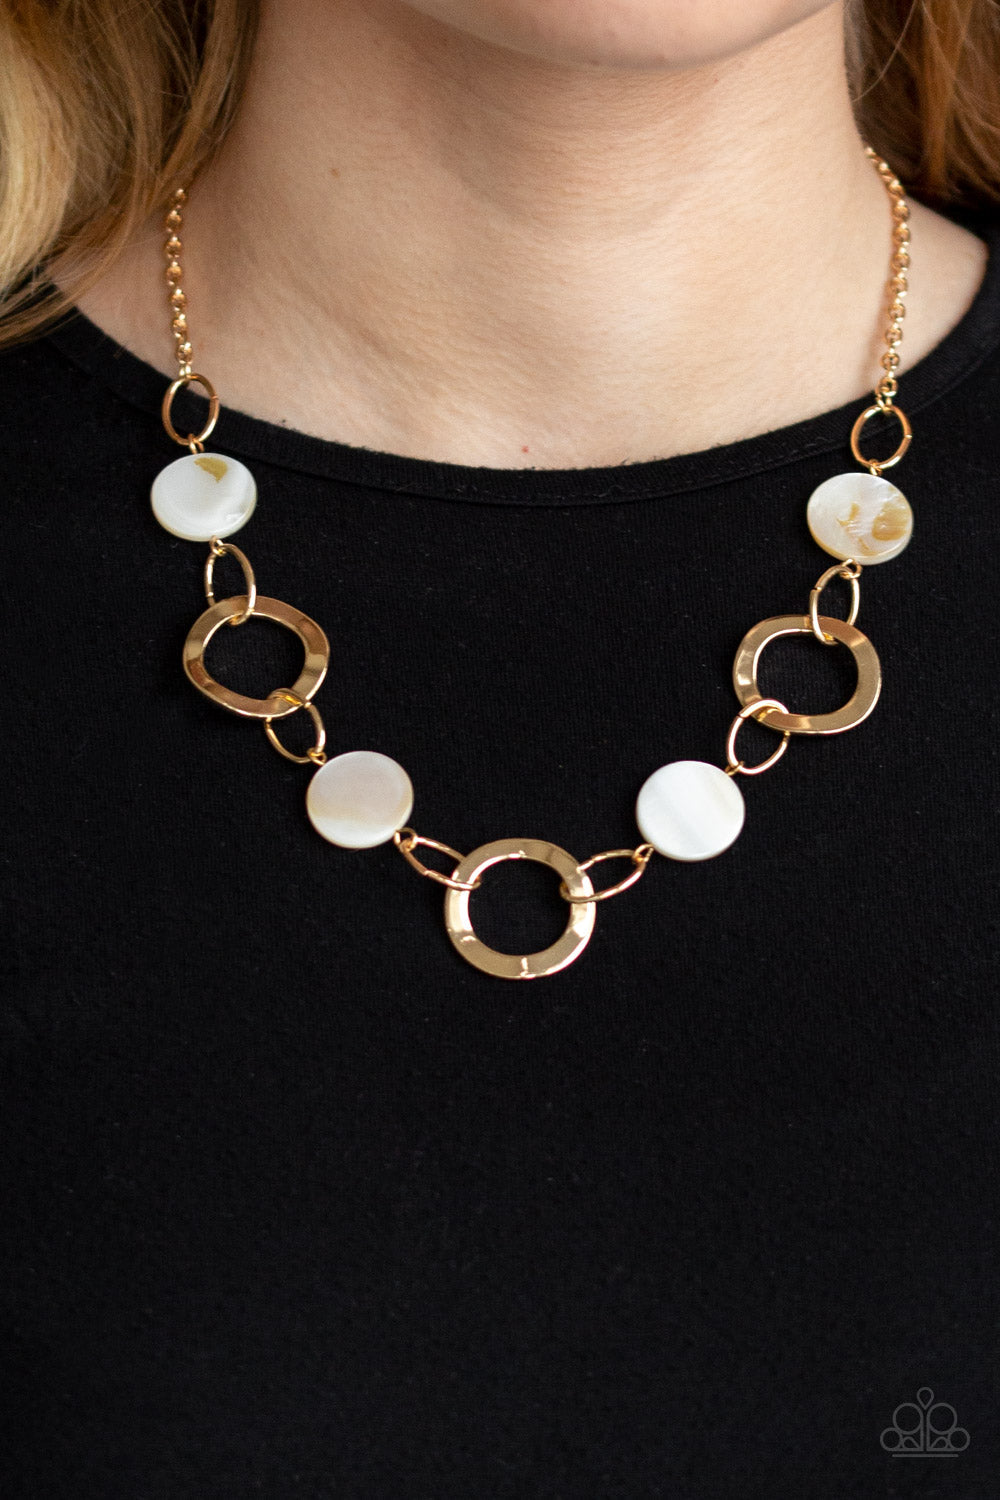 Paparazzi Bermuda Bliss - Gold - White Shell Discs - Necklace & Earrings - $5 Jewelry with Ashley Swint